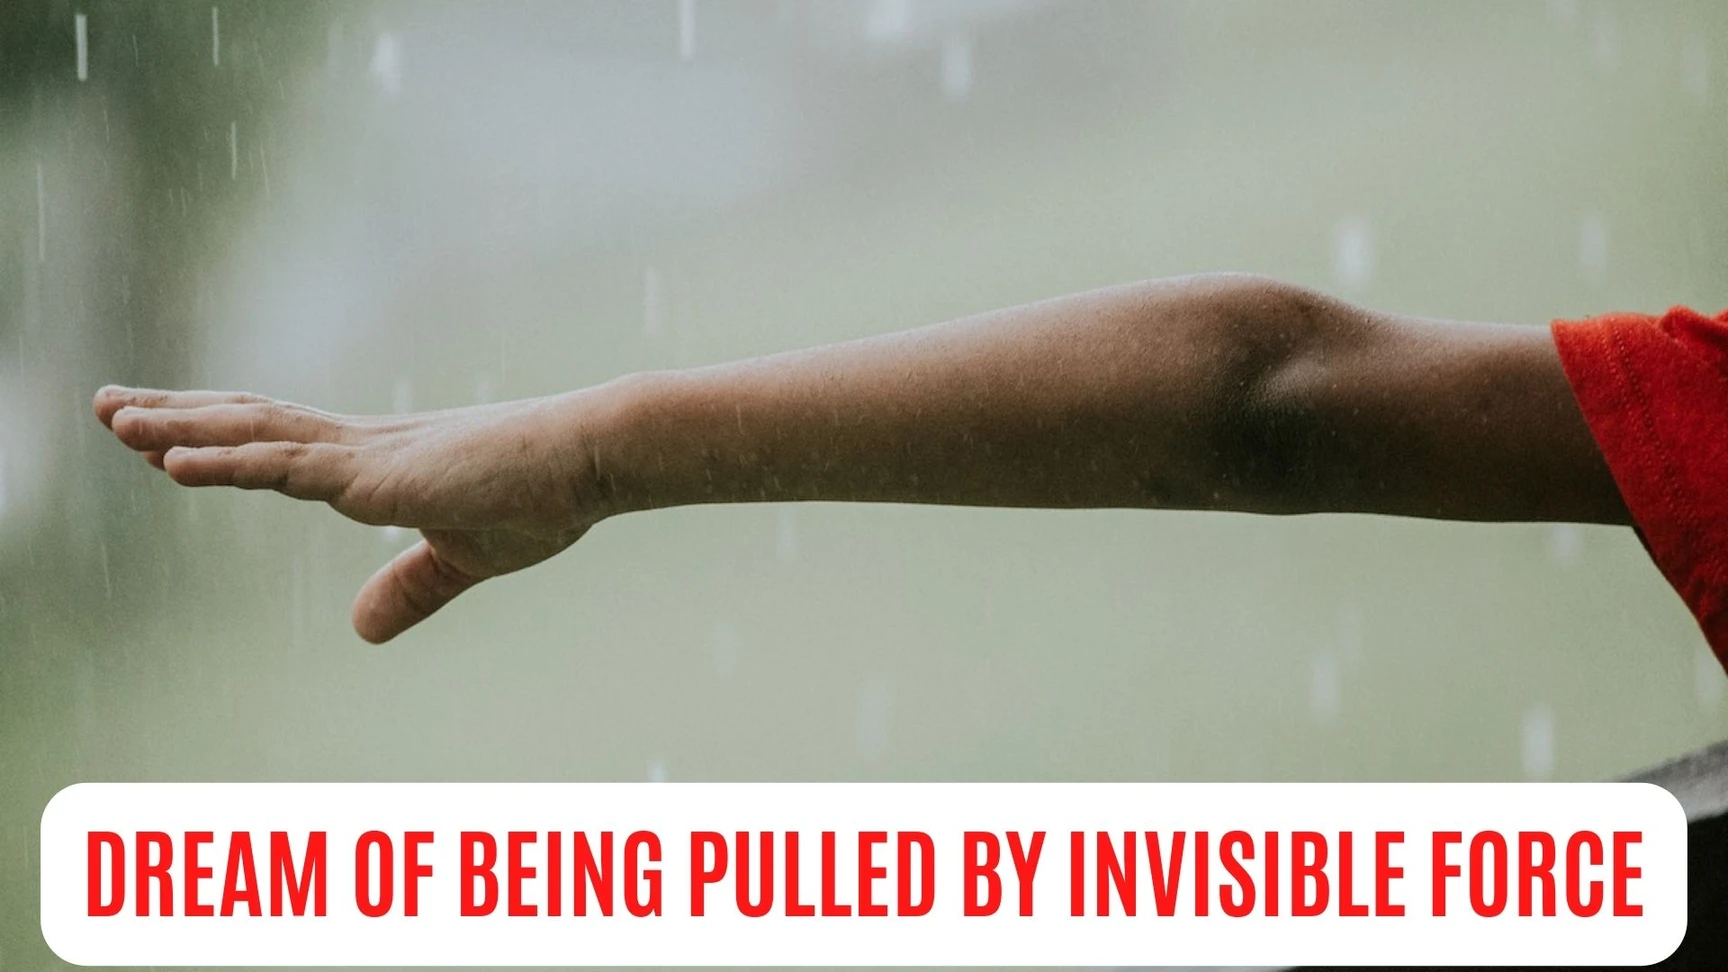 What Does It Mean To Dream Of Being Pulled By An Invisible Force?